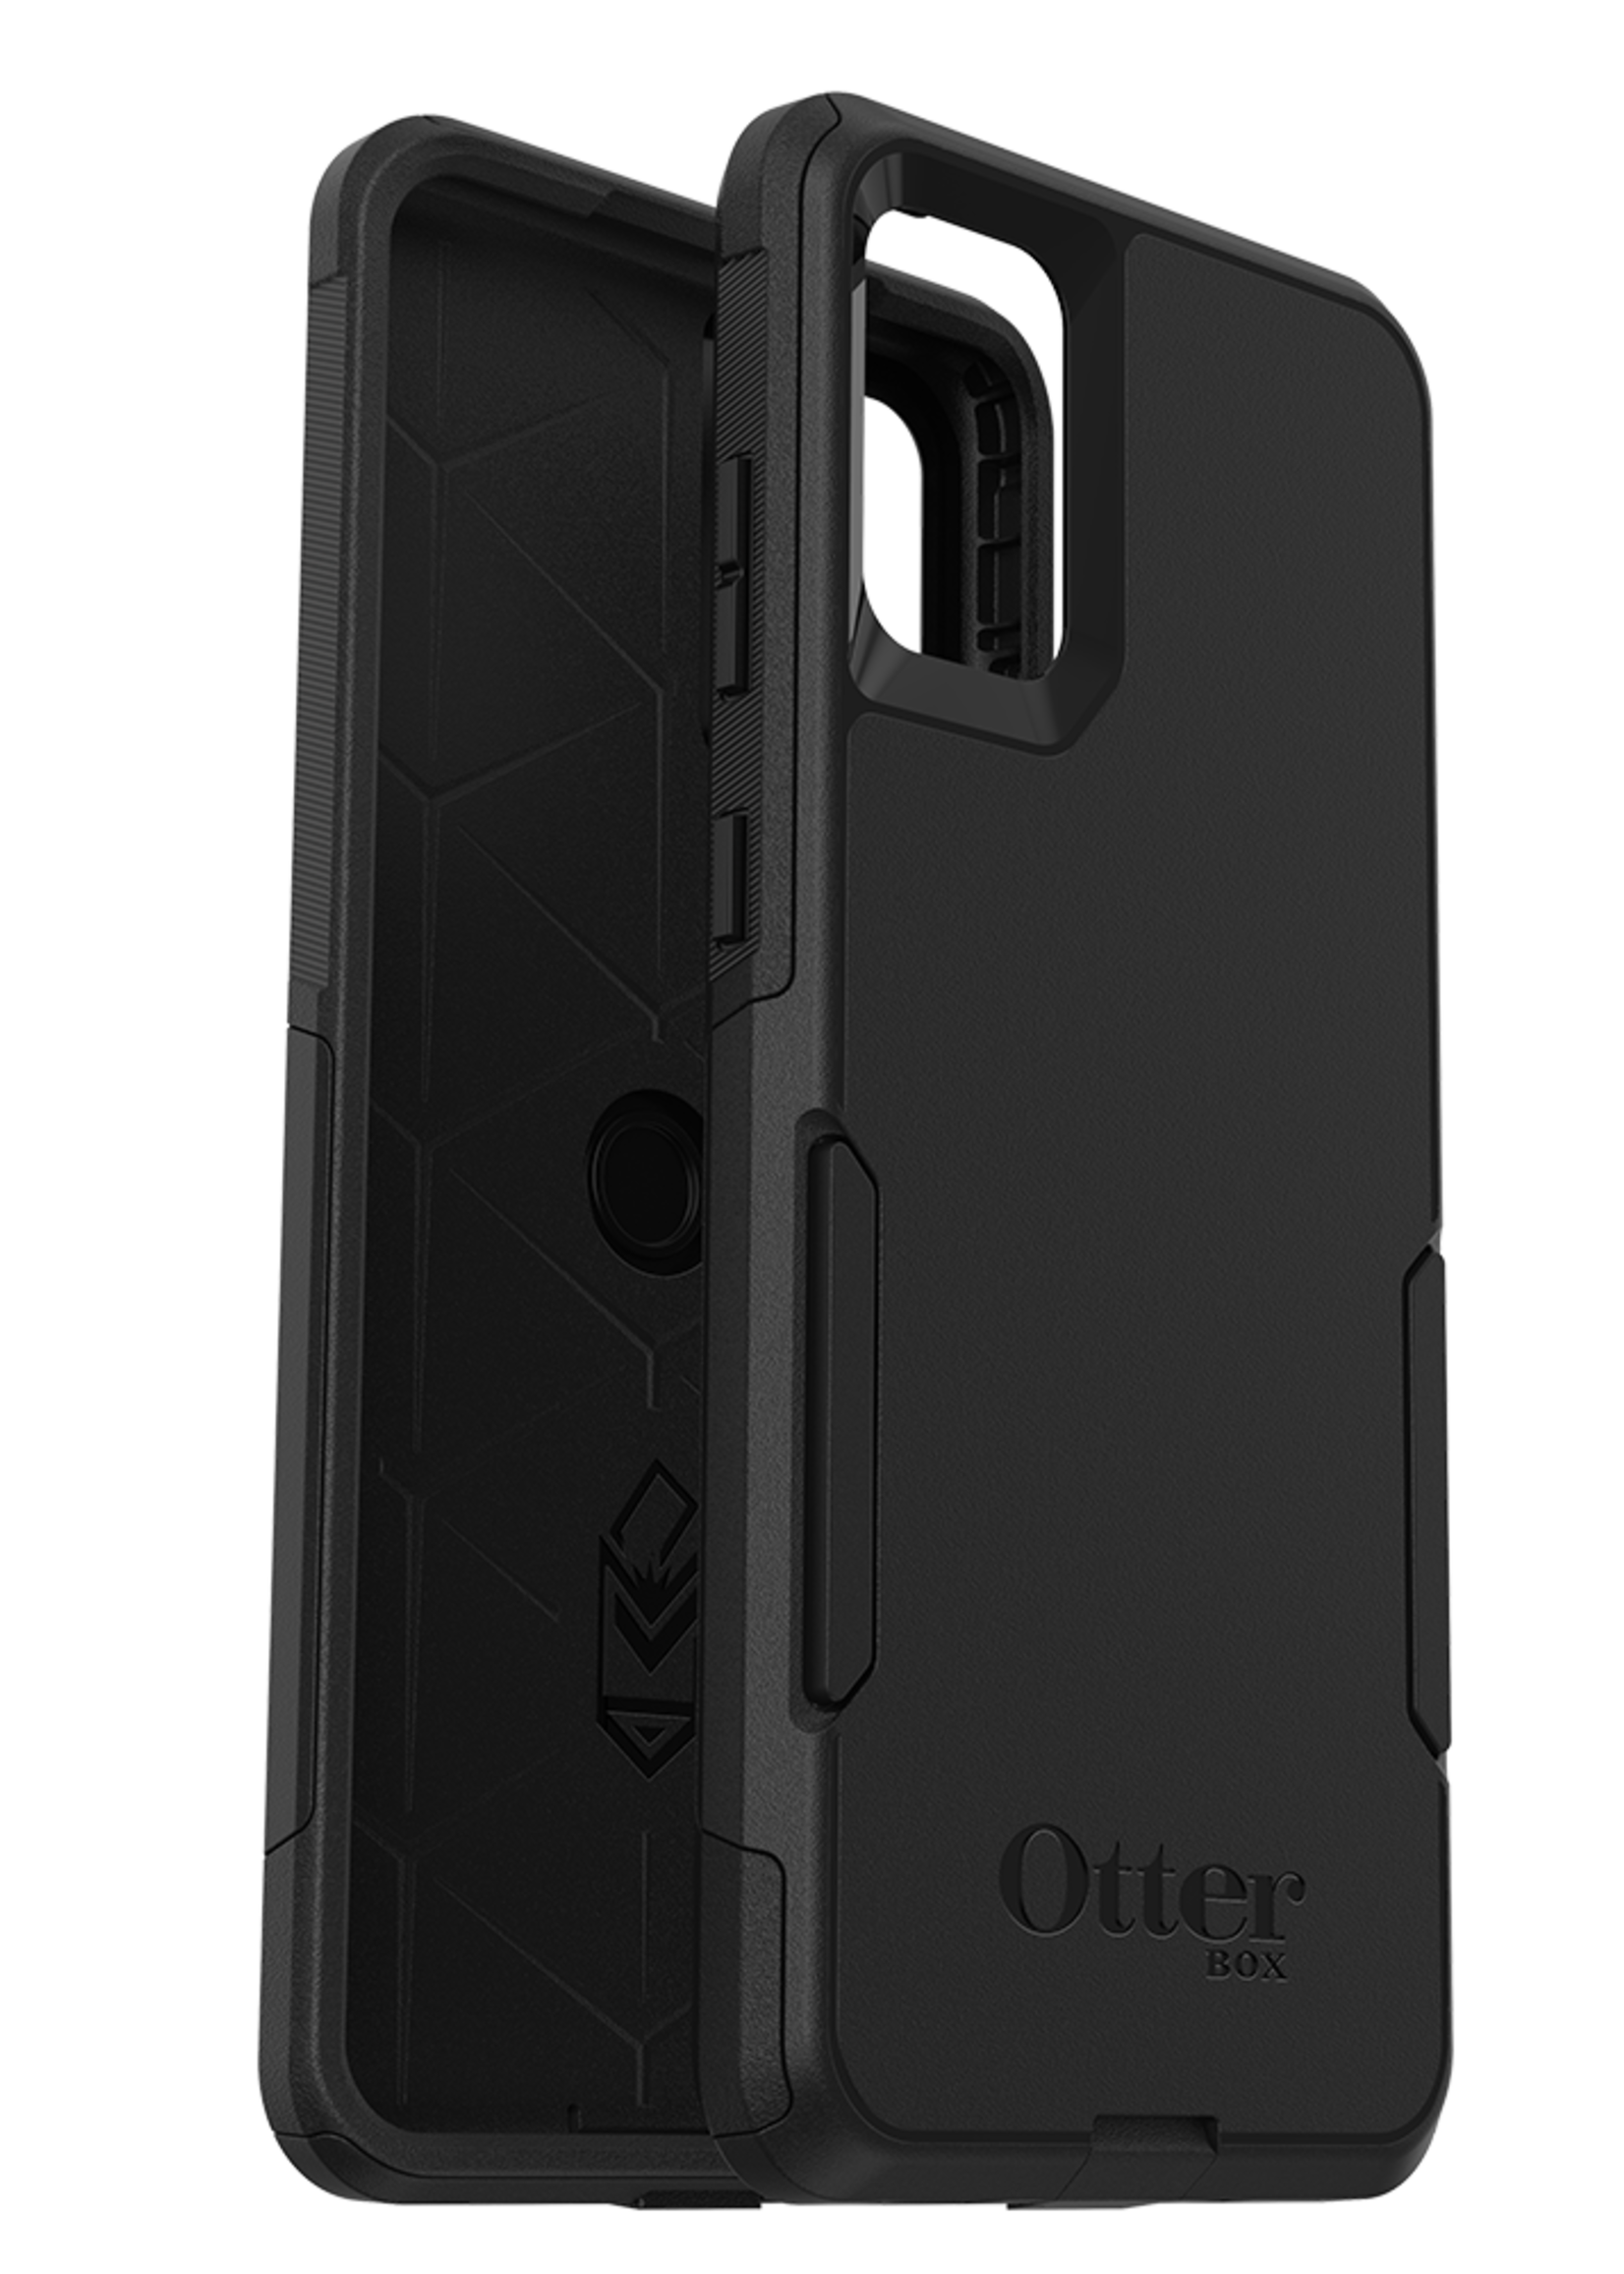 Otterbox OtterBox - Commuter Case for Samsung Galaxy S20 Plus - Black